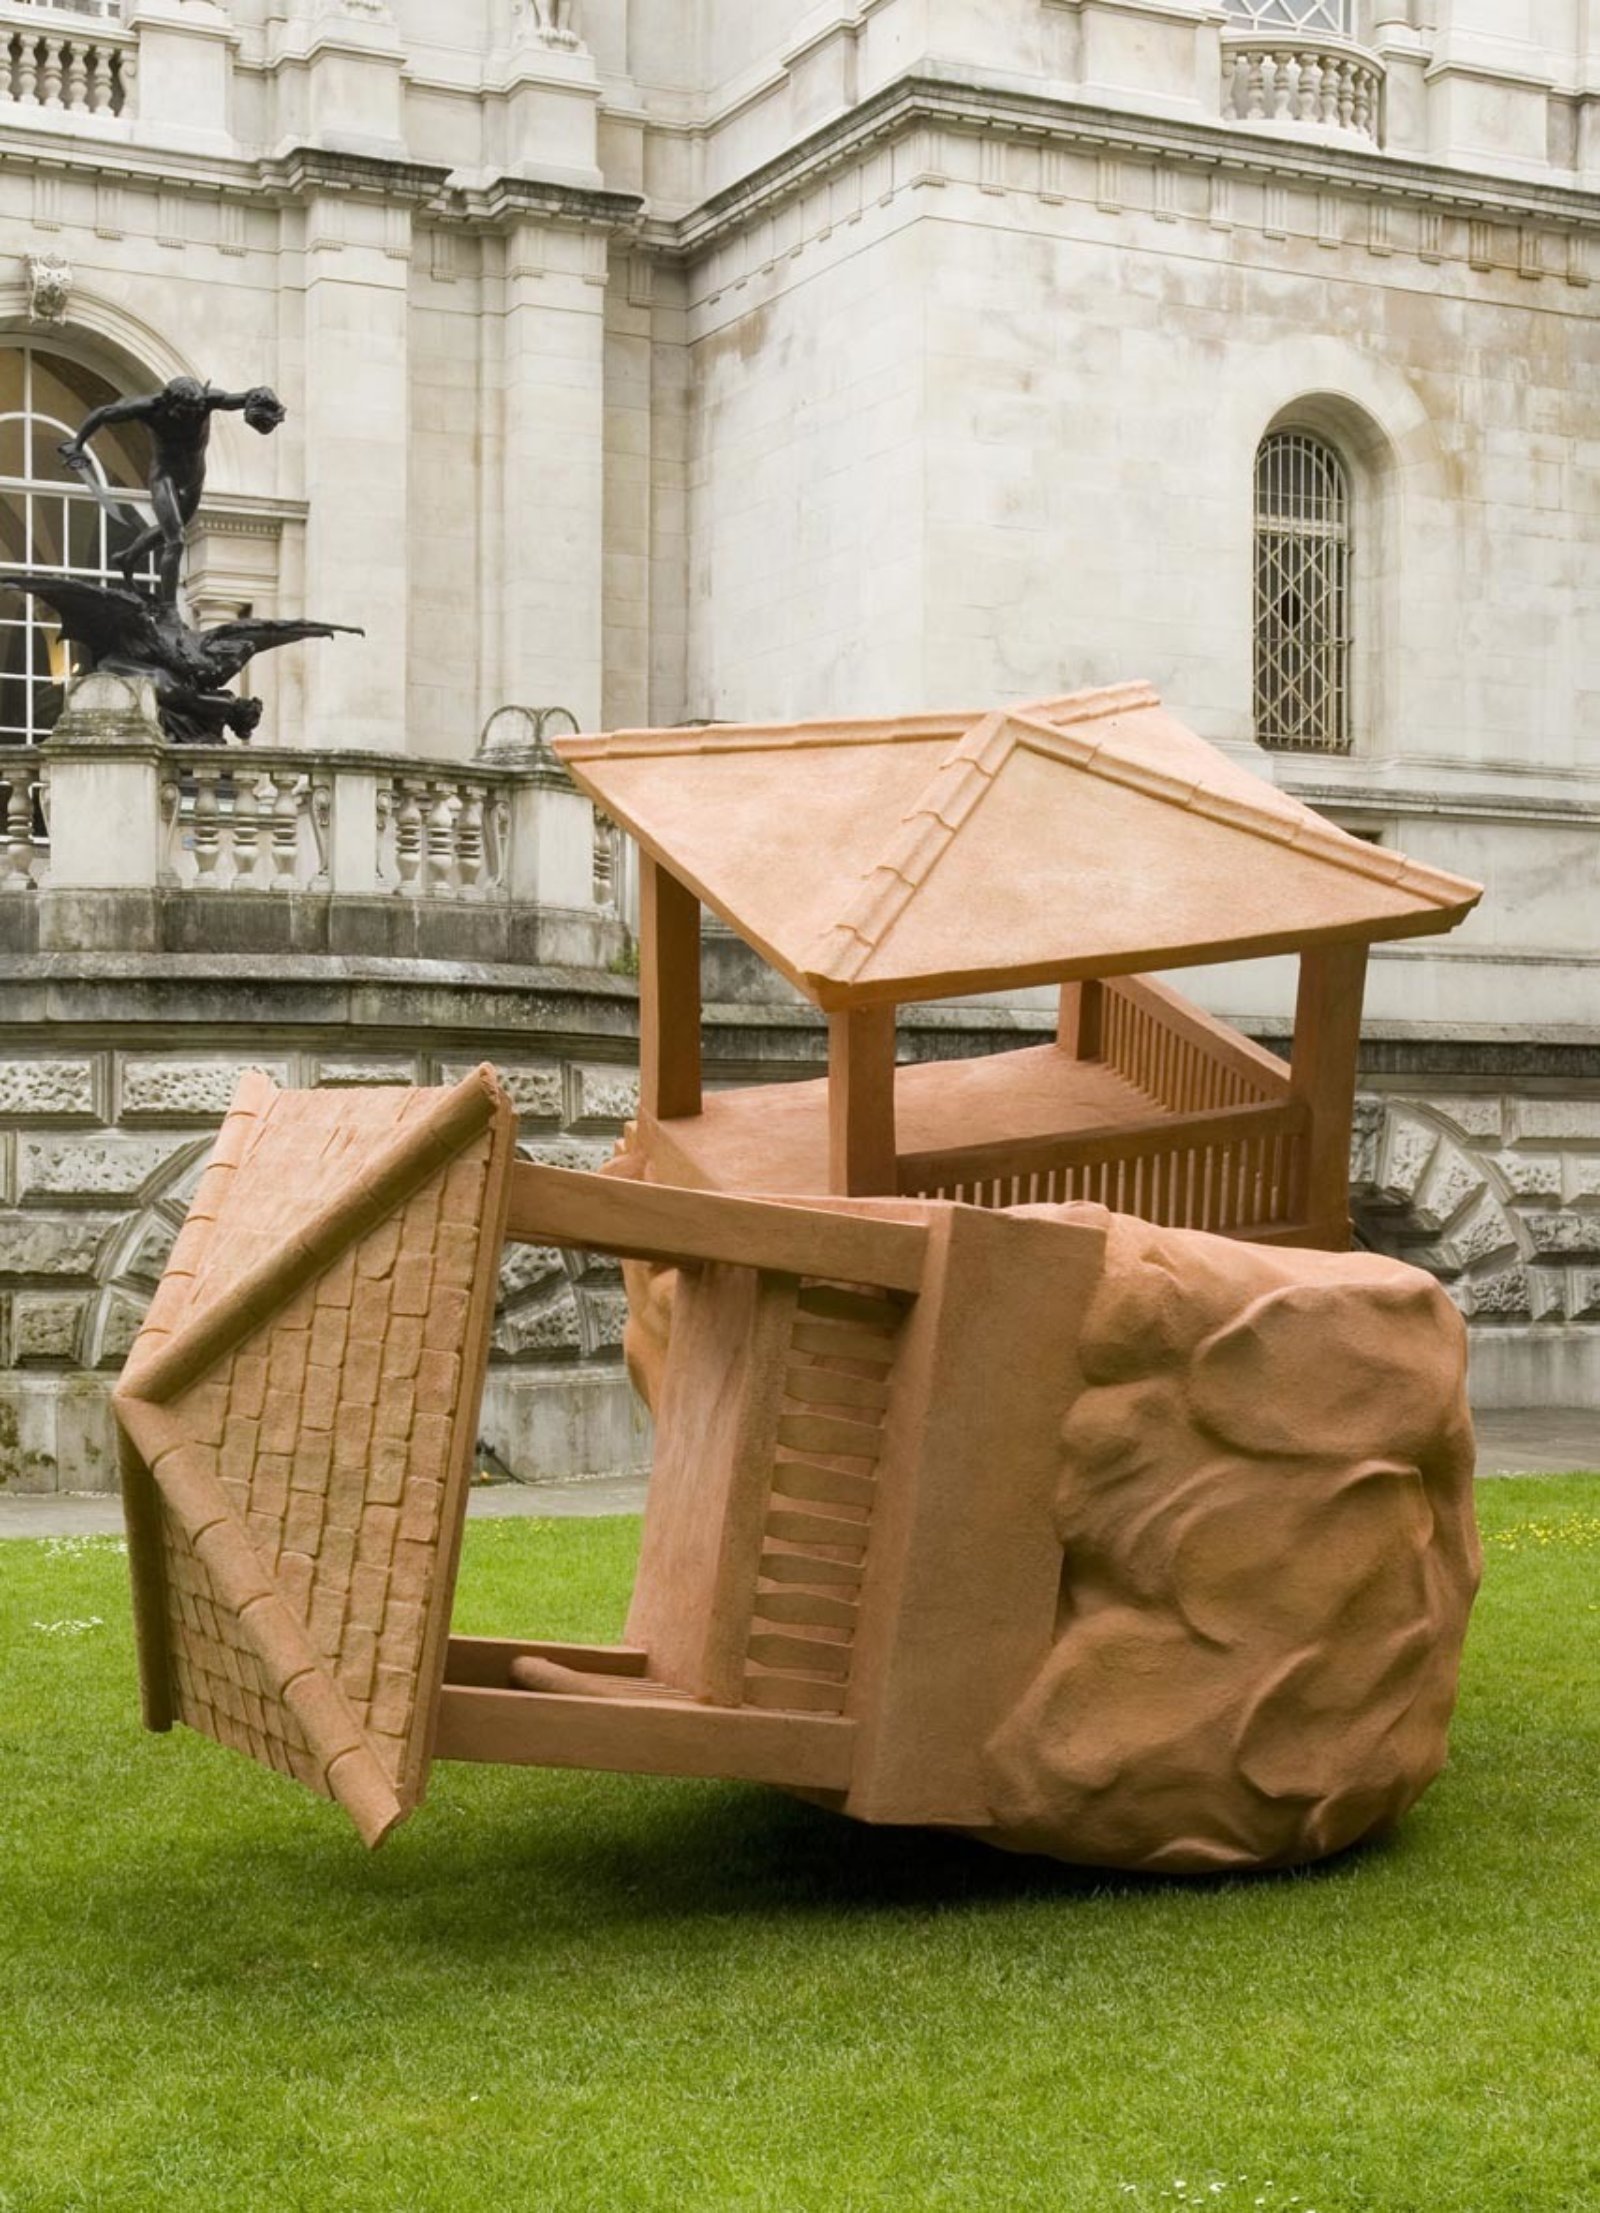 Christina Mackie, The Large Huts, 2007, steel, polystyrene, acrylic cement render, dimensions variable. Installation view, Art Now Sculpture Court, Tate Britain, London, UK